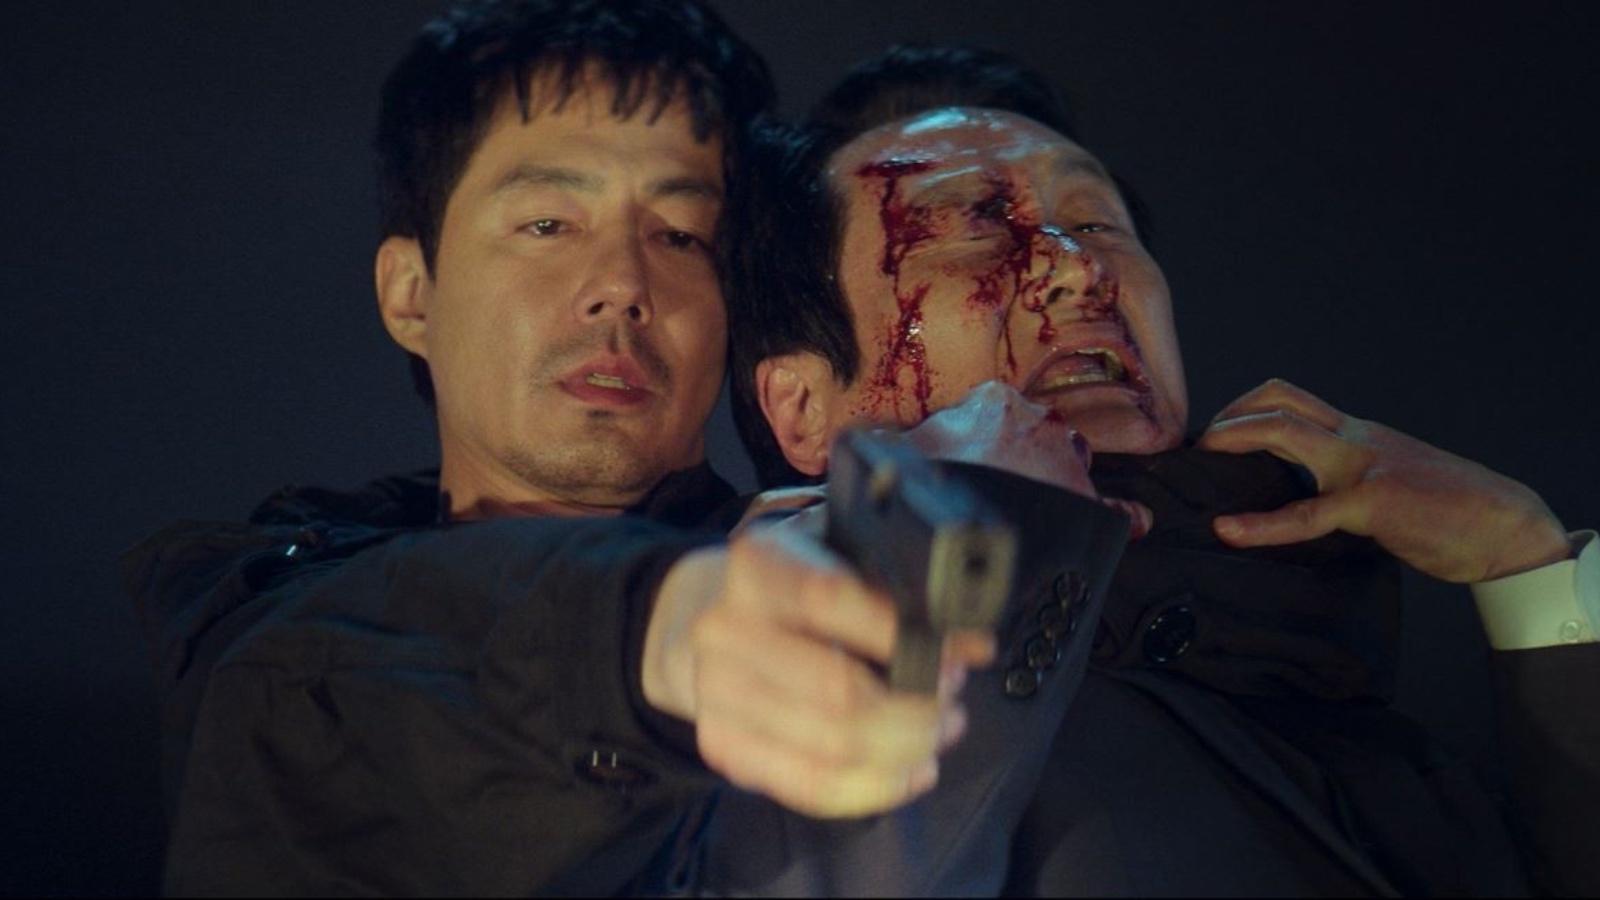 Moving Episode 12 starring Jo In-sung as Doo-sik